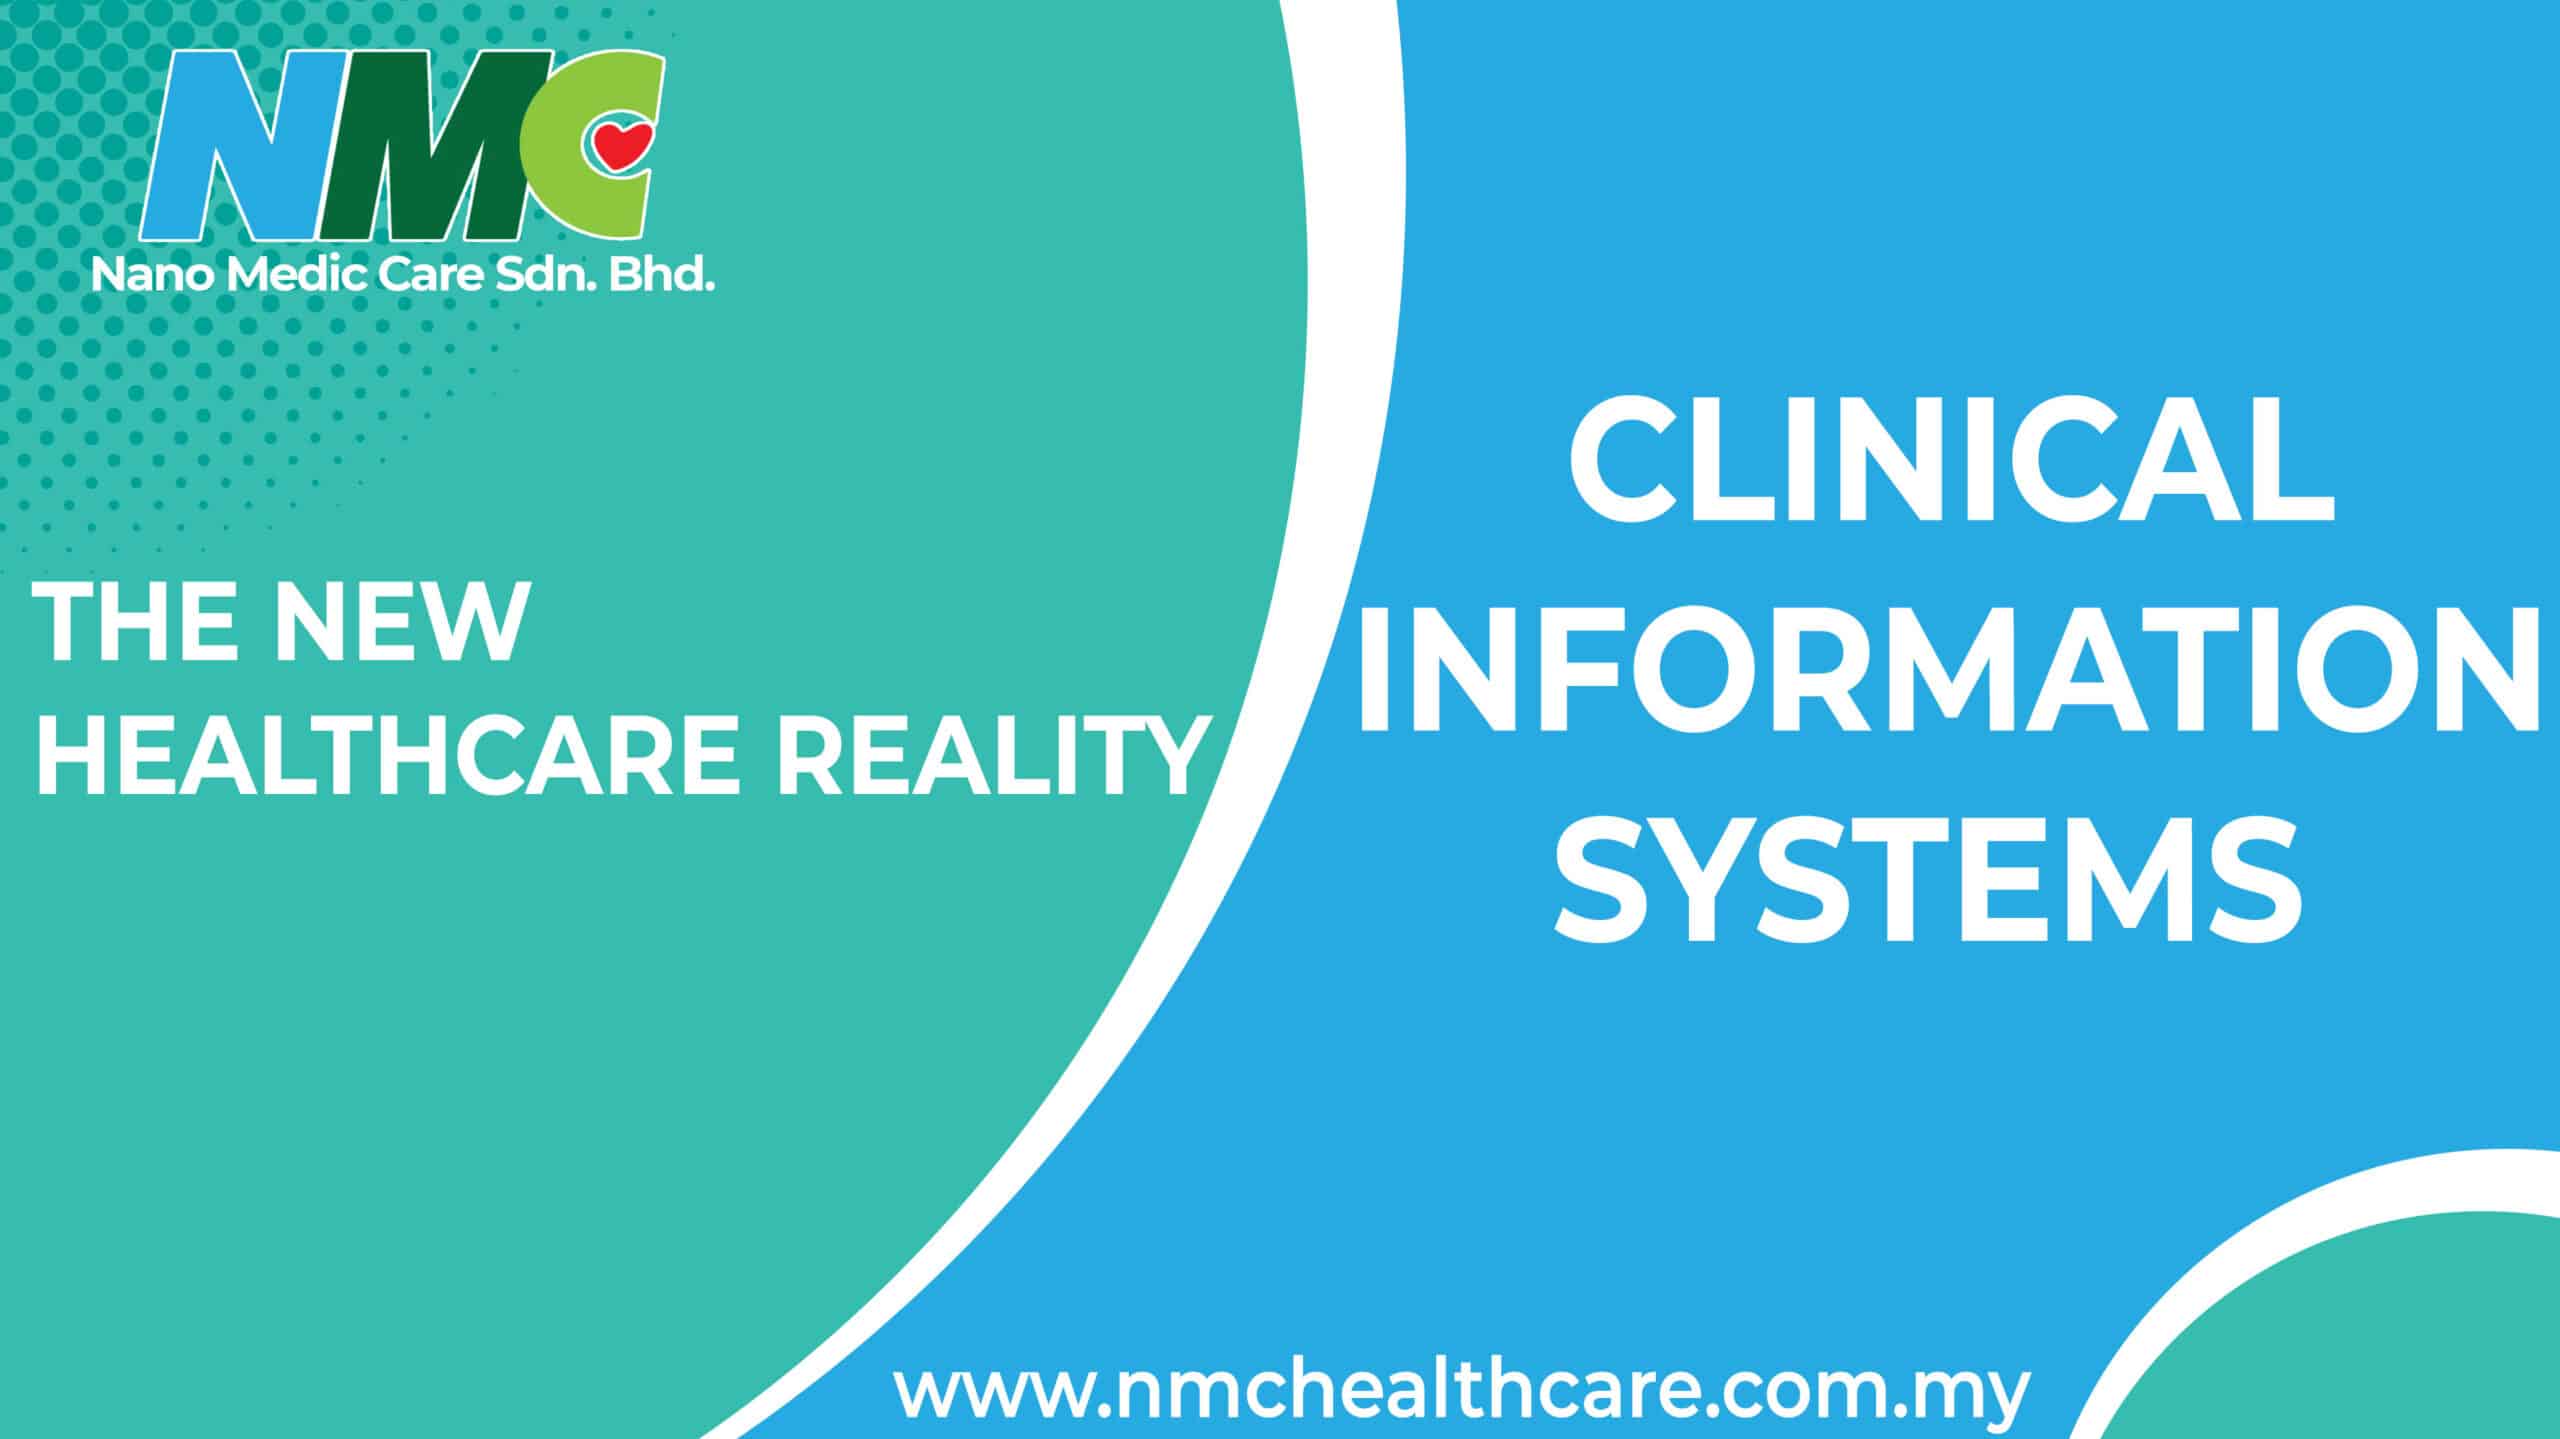 Clinical information systems are rapidly becoming the new reality in healthcare. These systems play a crucial role in gathering and managing patient data, enabling healthcare providers to make informed decisions and deliver improved care. With their ability